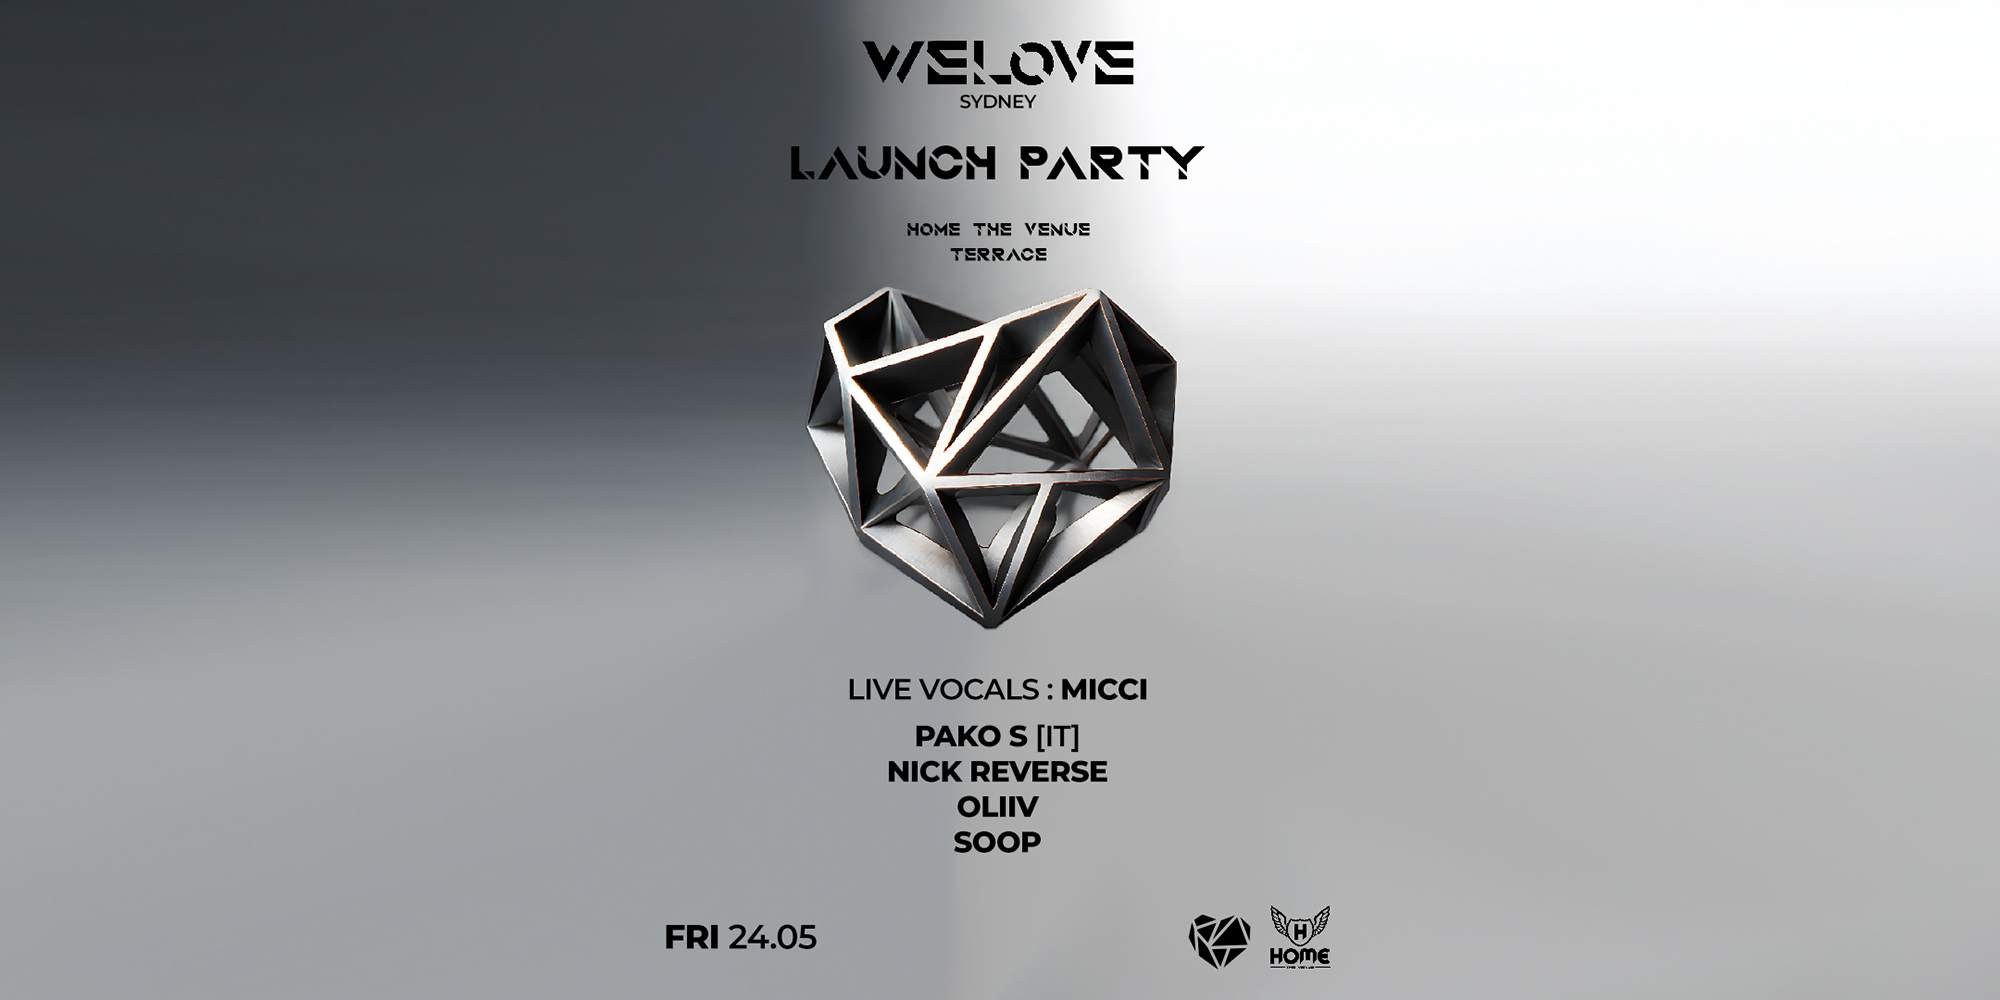 WeLove Sydney Launch Party - Home The Venue - Página frontal